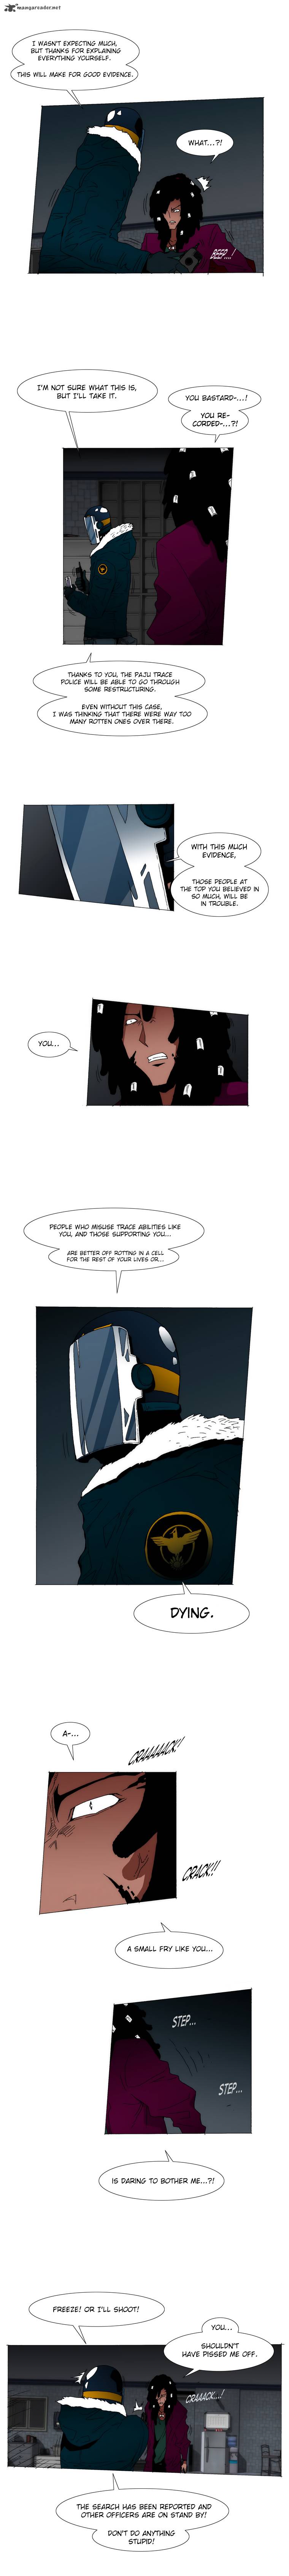 Trace 20 Chapter 7 Page 6